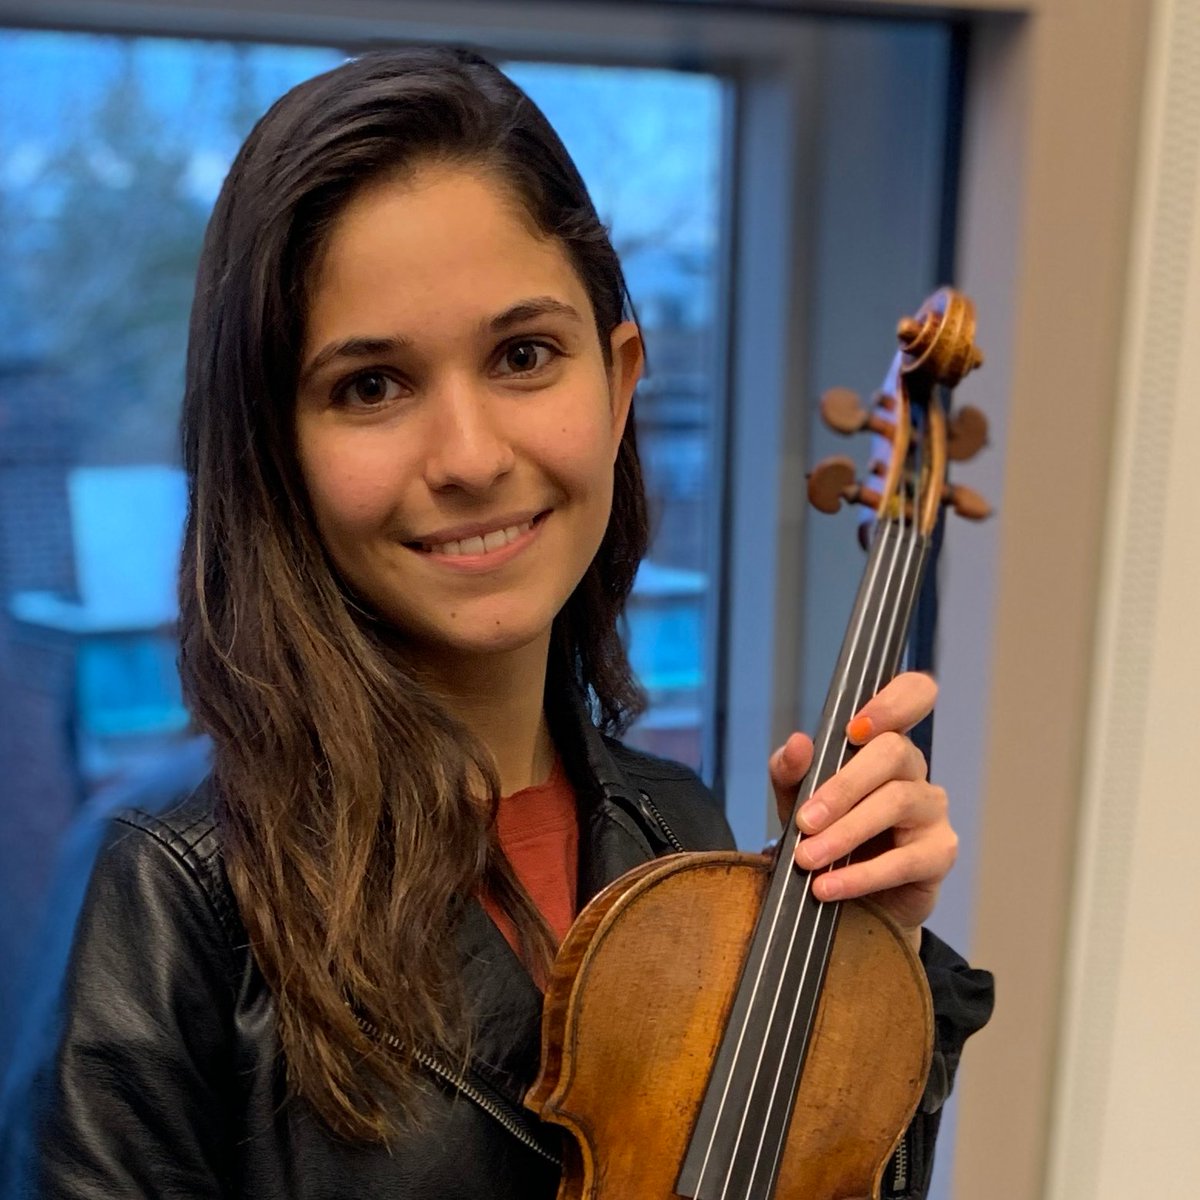 “I definitely loved the violin because it was something for me to really put my time and passions into. And then when I finally started getting the social side of it, it really just opened up everything for me.” Listen to the full episode, subscribe and leave a review!